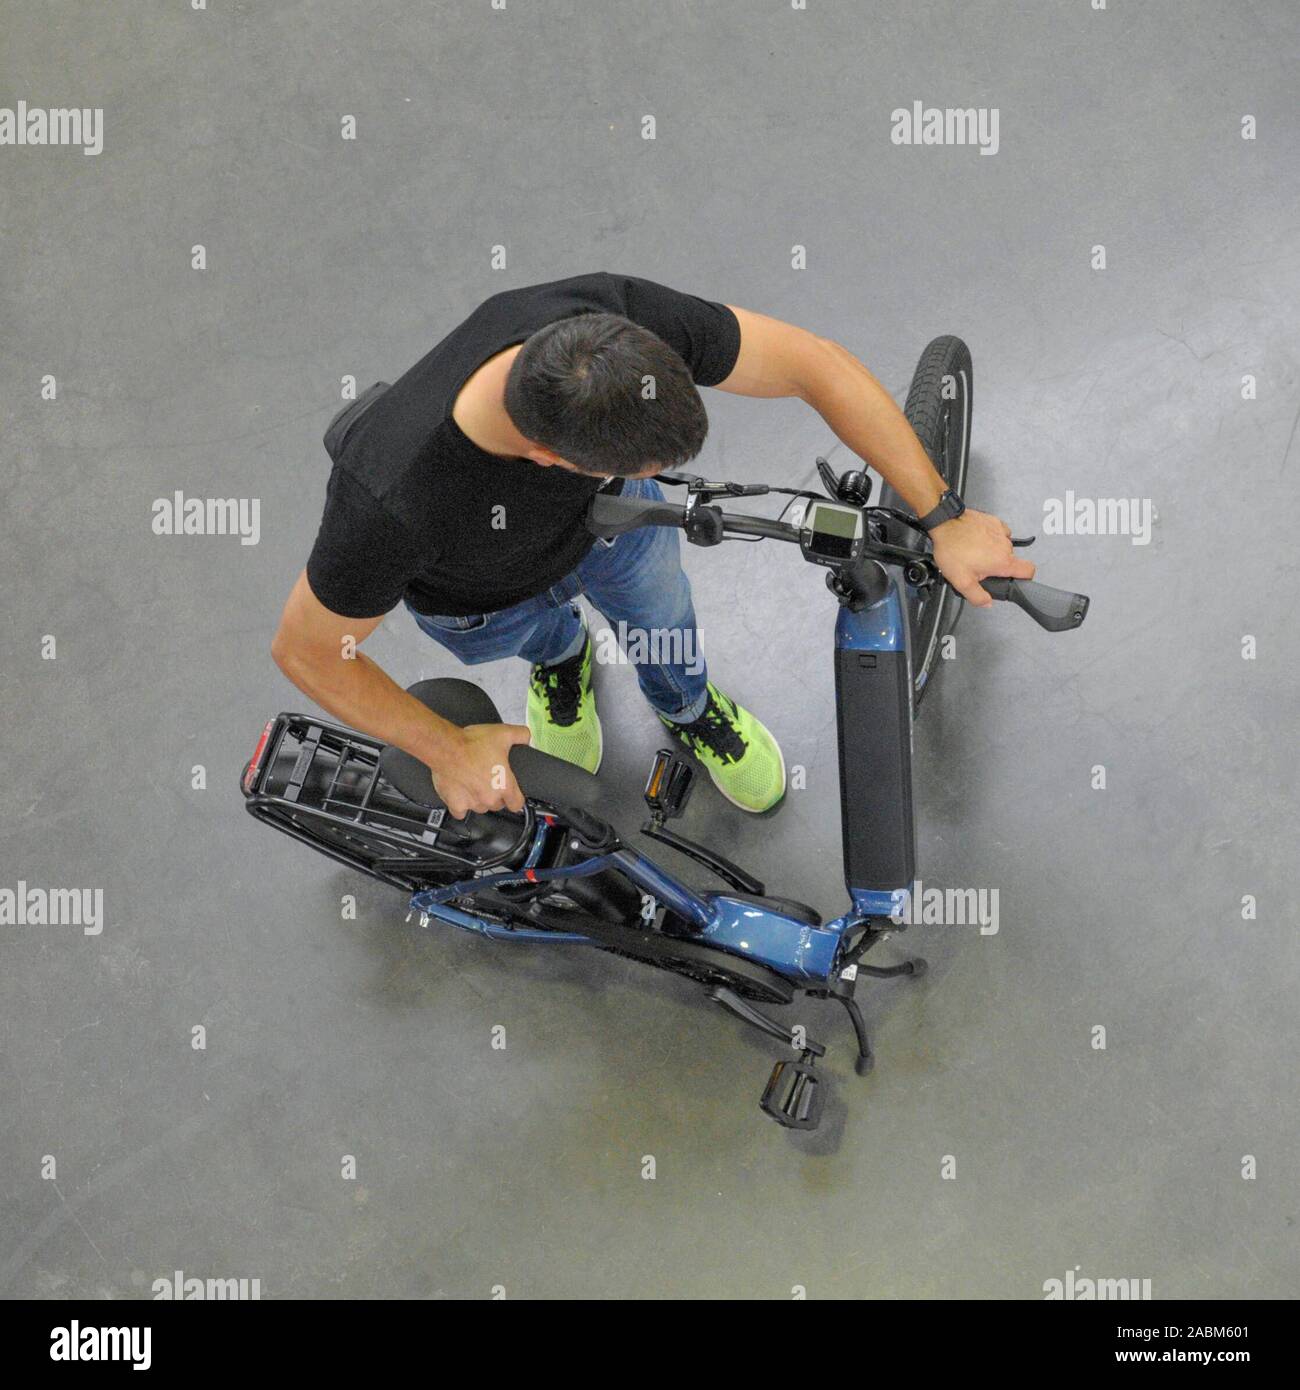 The city bike Upstreet 2 by Flyer. pressedienst-fahrrad GmbH presented the  "Bicycle Trends for 2020" at the Verkehrszentrum Deutsches Museum.  [automated translation] Stock Photo - Alamy